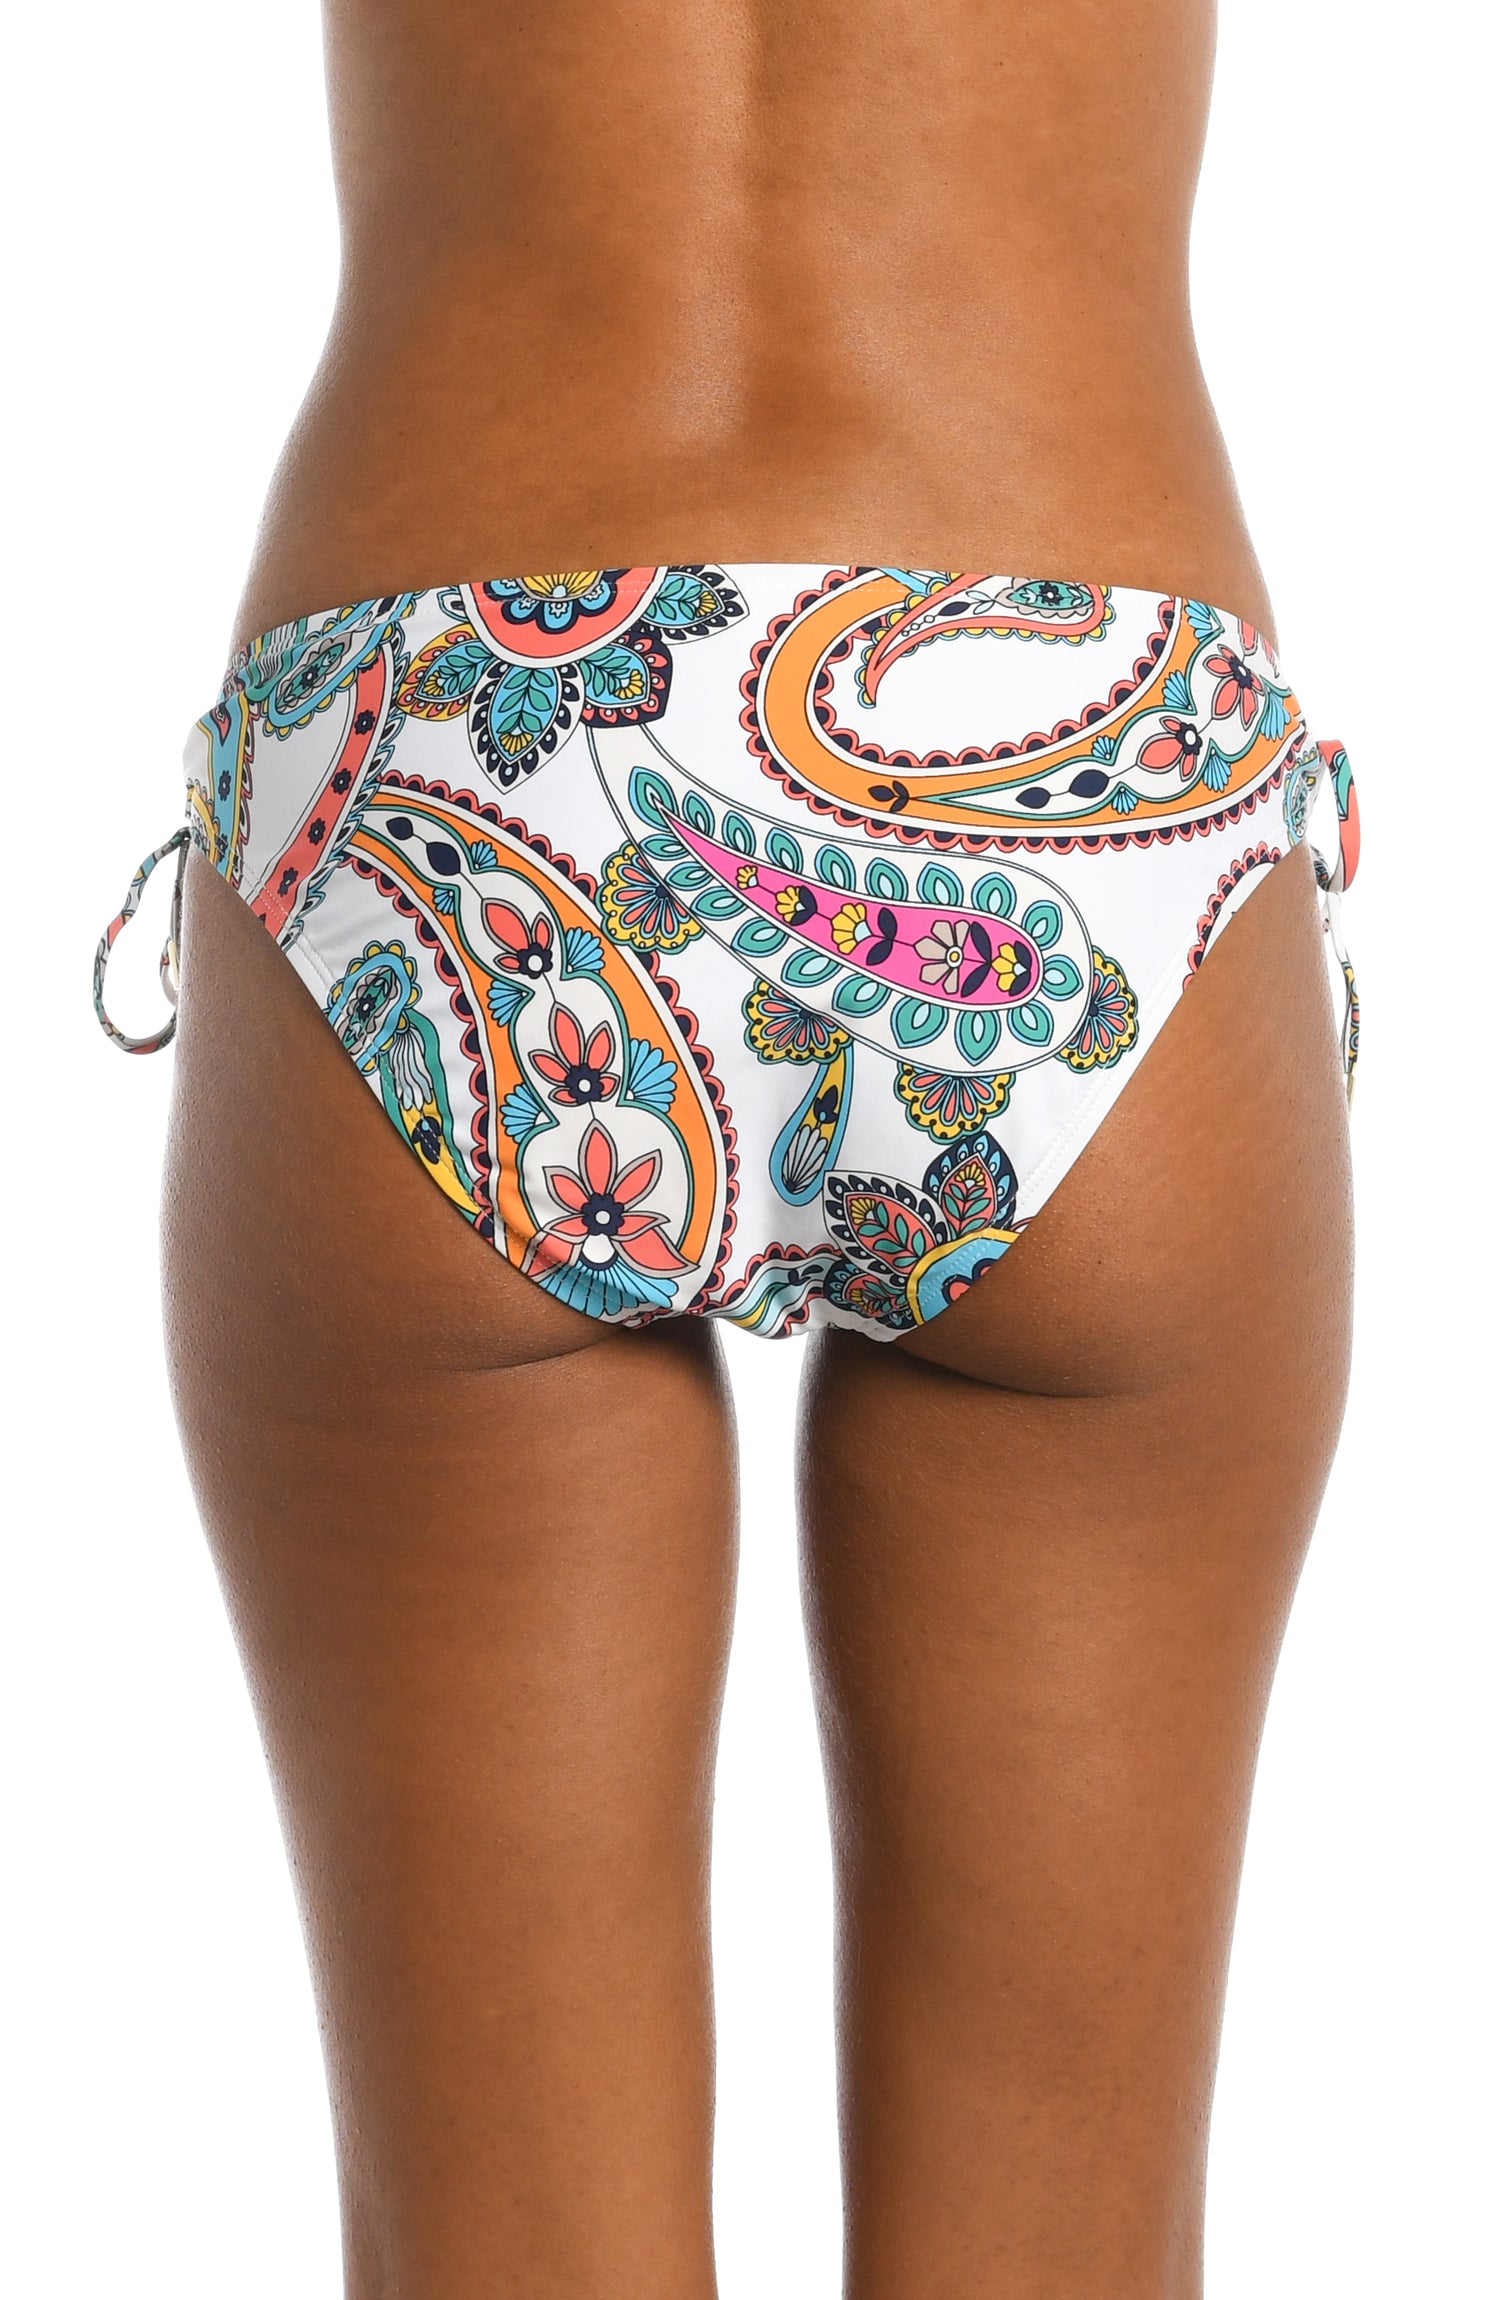 Model is wearing a multi colored paisley printed side tie hipster bottom from our Pave the Way collection!